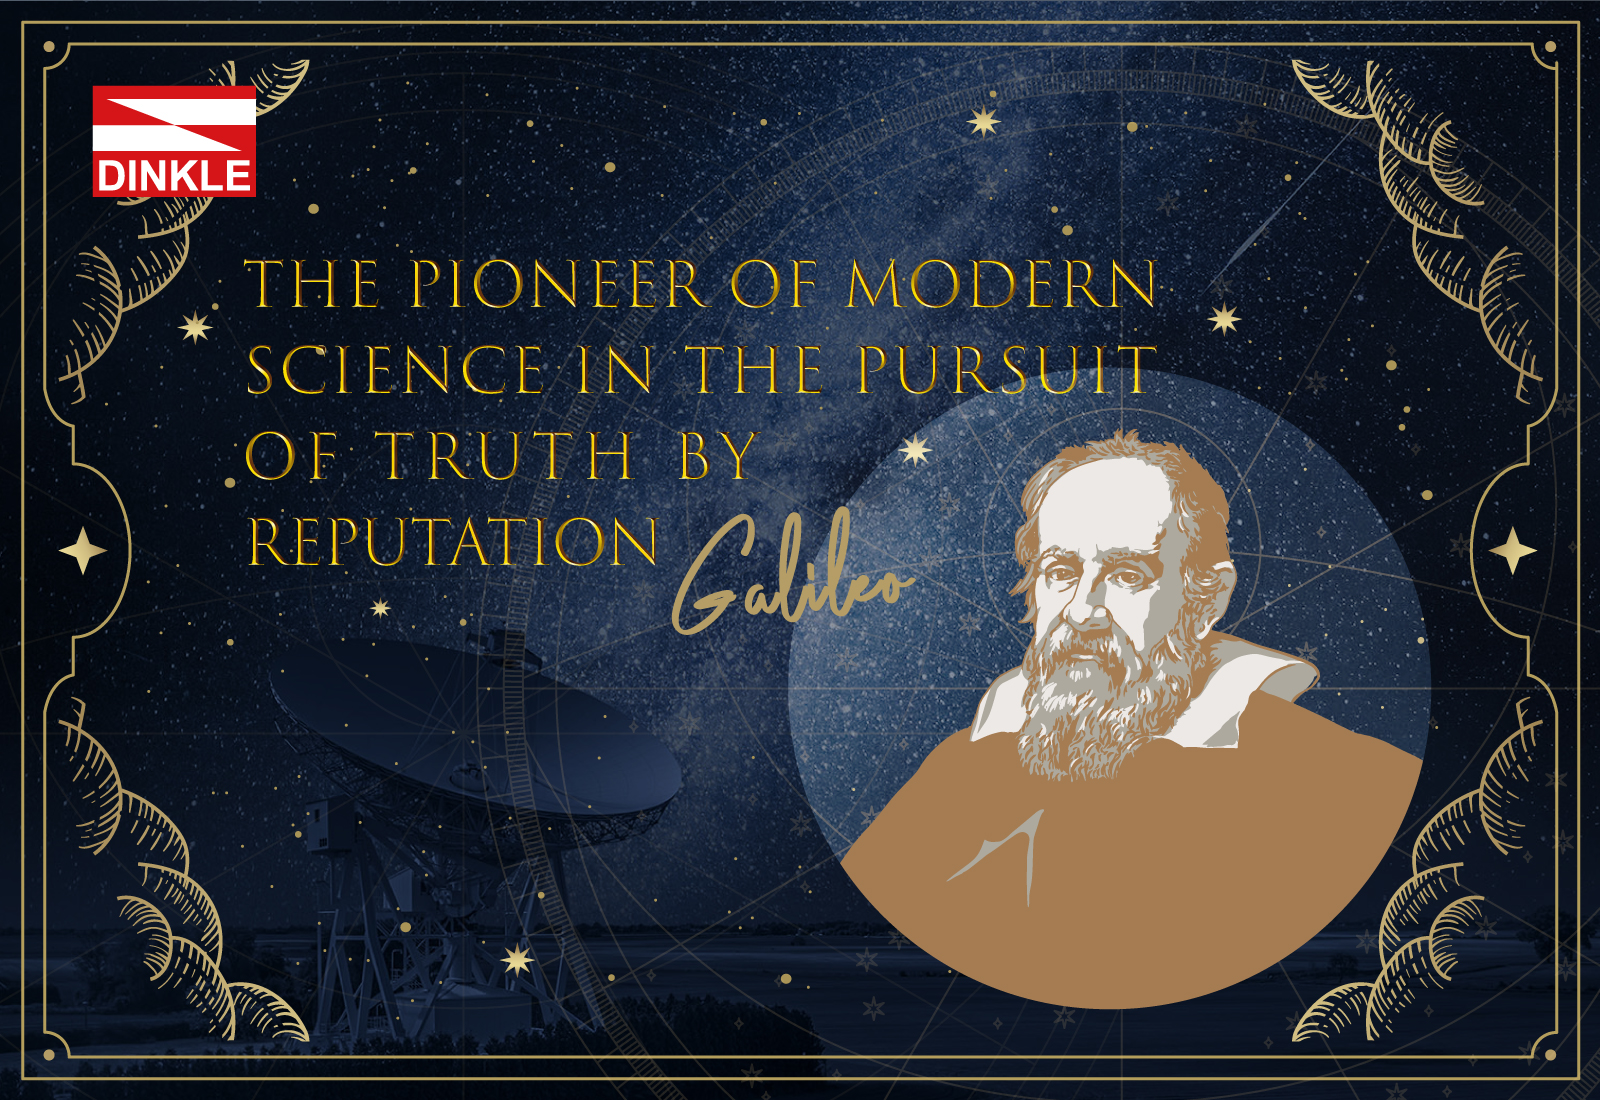 The Pioneer of Modern Science in the Pursuit of Truth by Reputation － Galileo